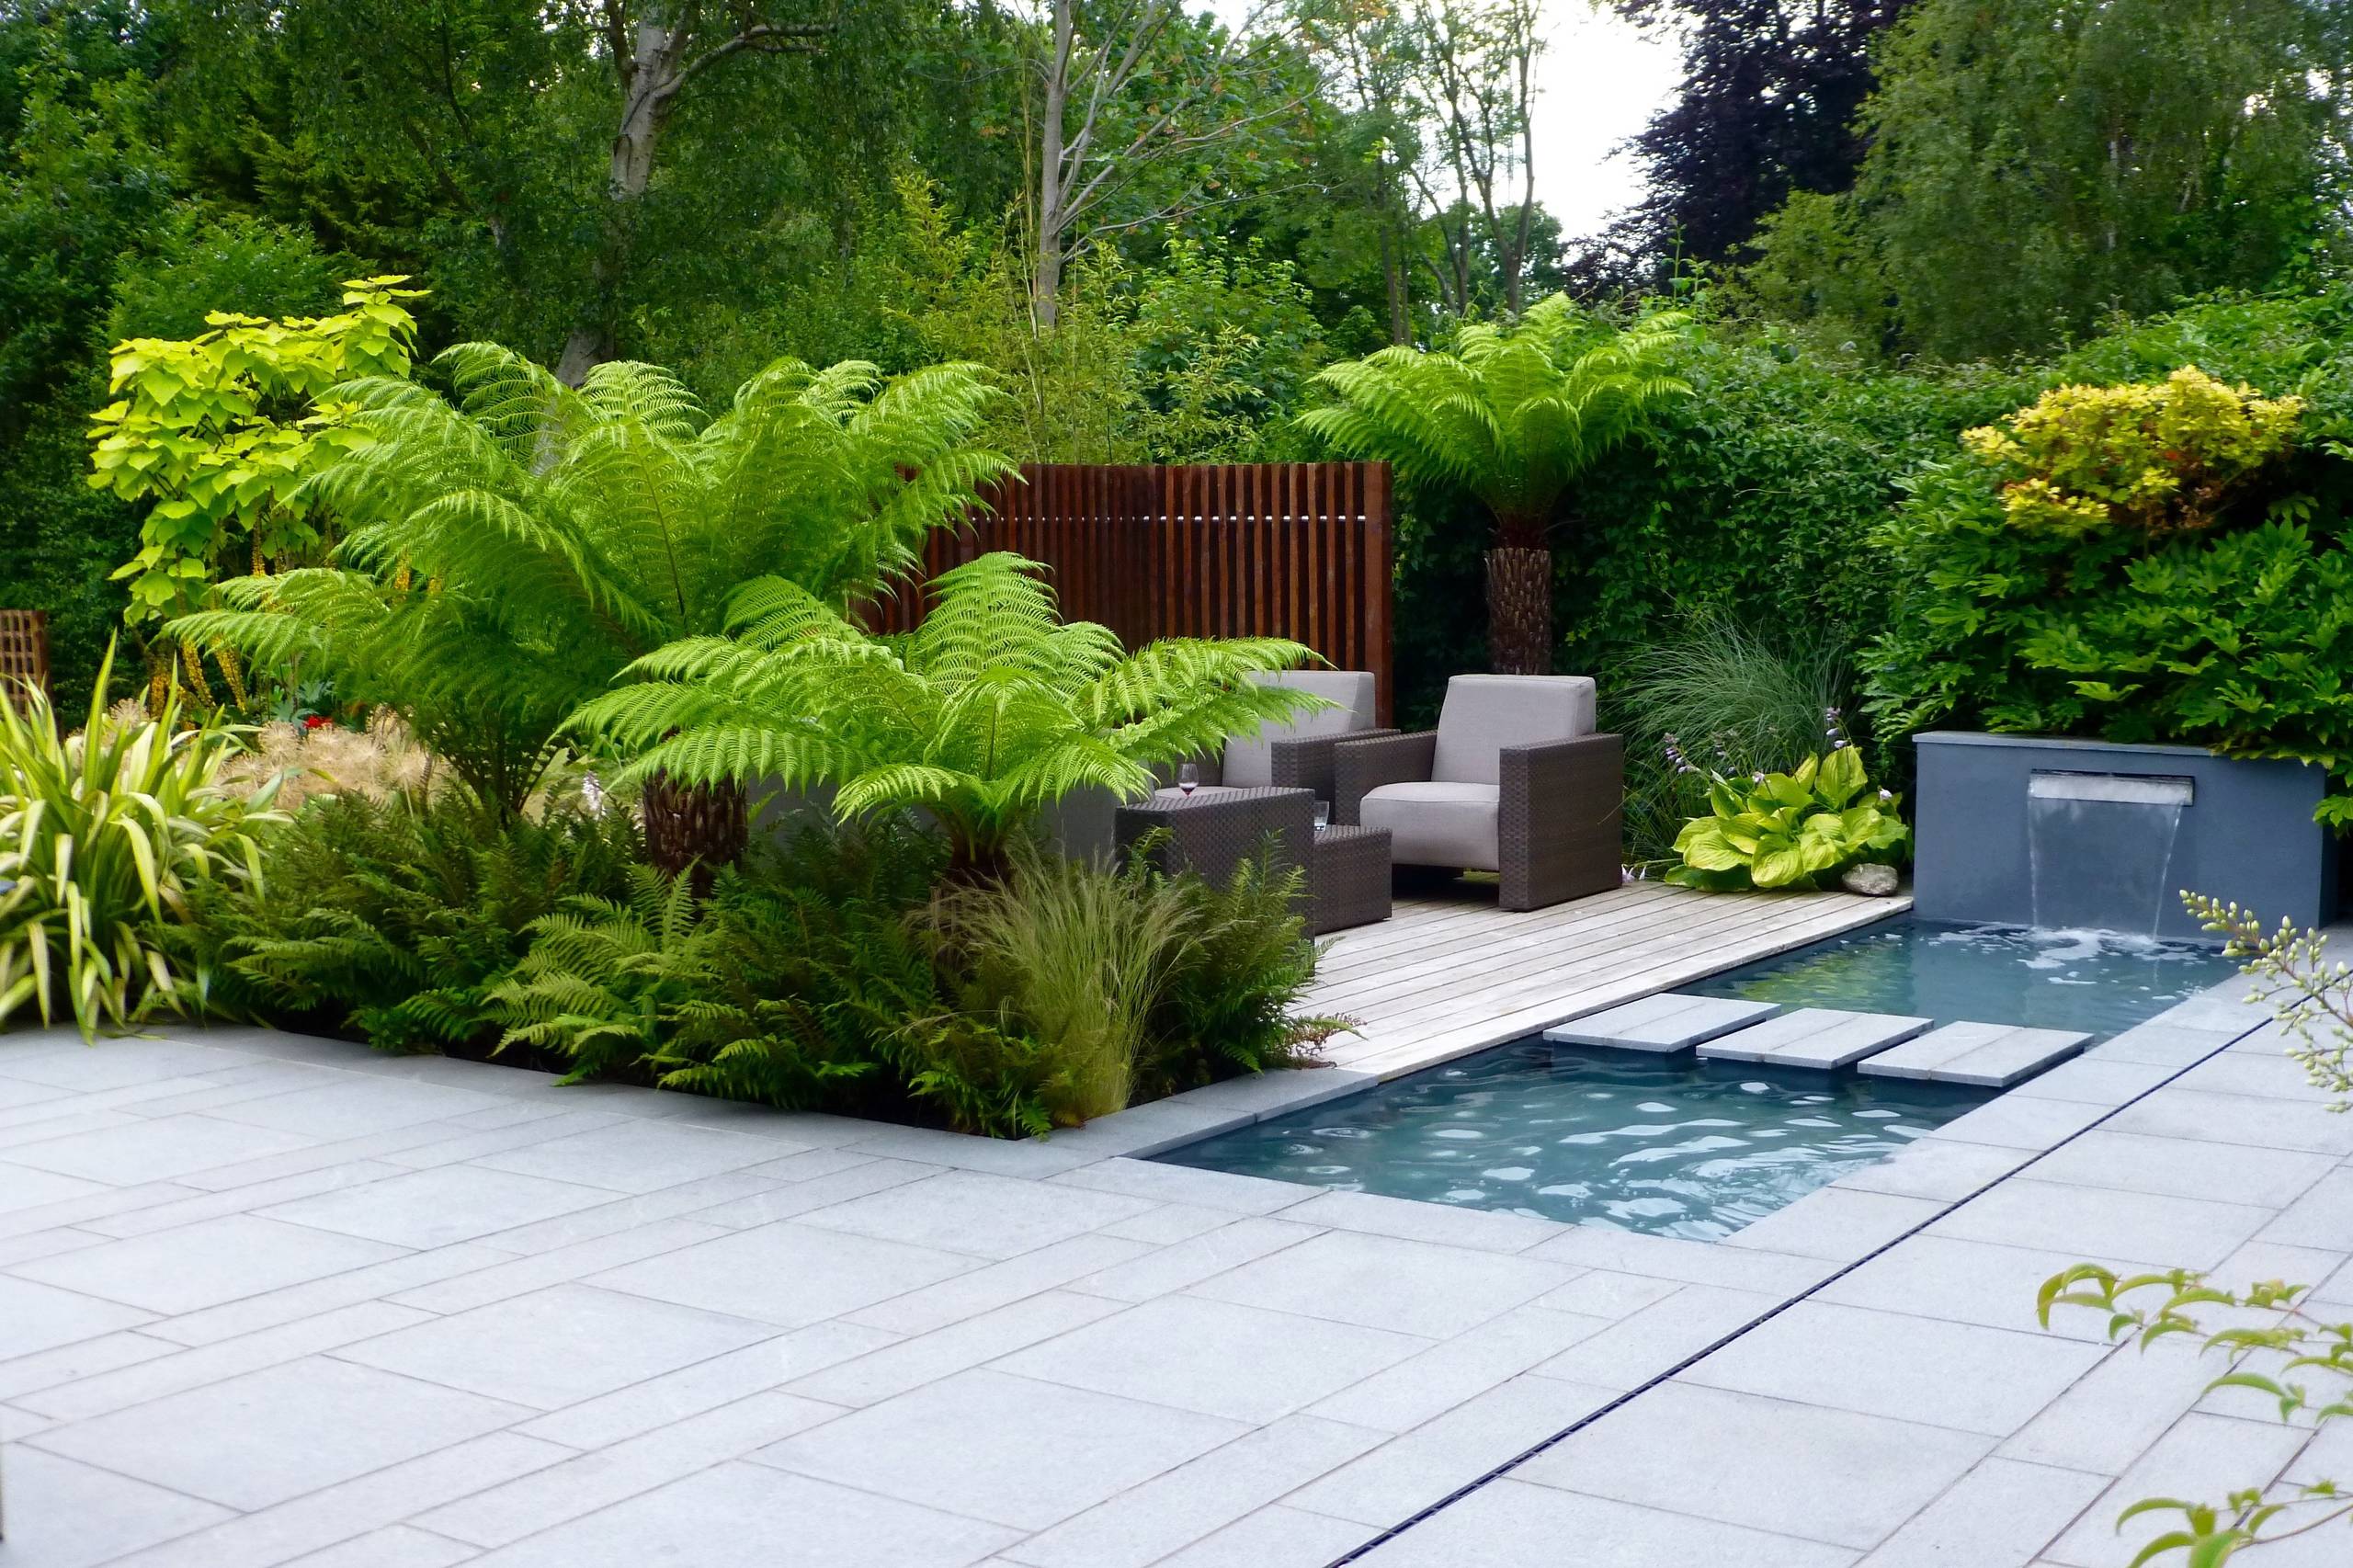 10 Tips For Creating A Tropical Garden In Uk Climate - Patio Border Planting Ideas Uk